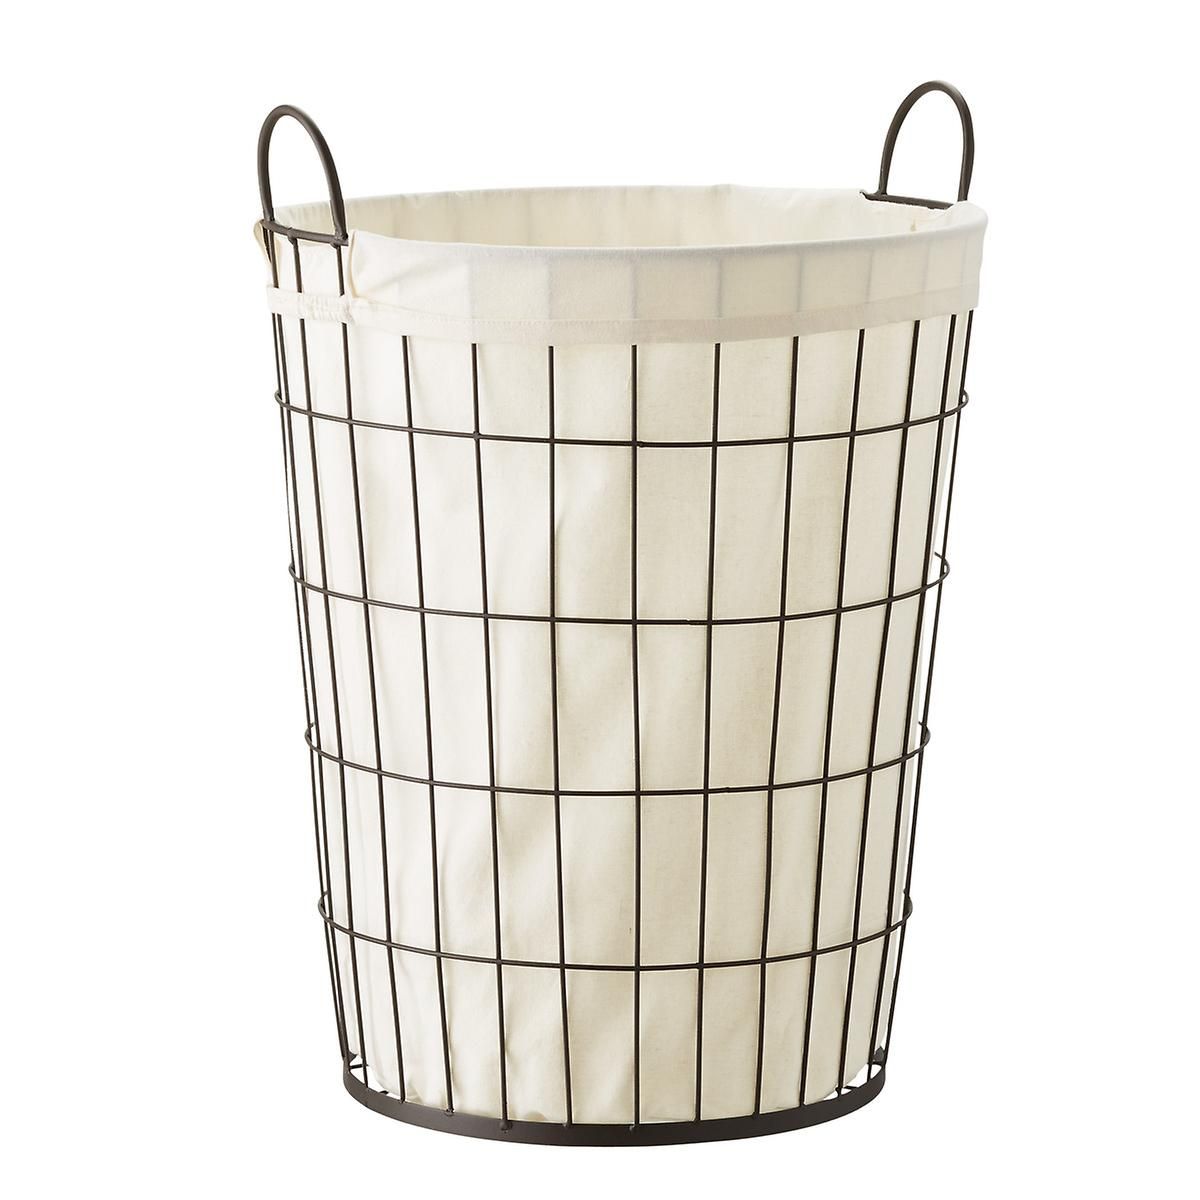 Iron Storage Barrel with Liner | The Container Store